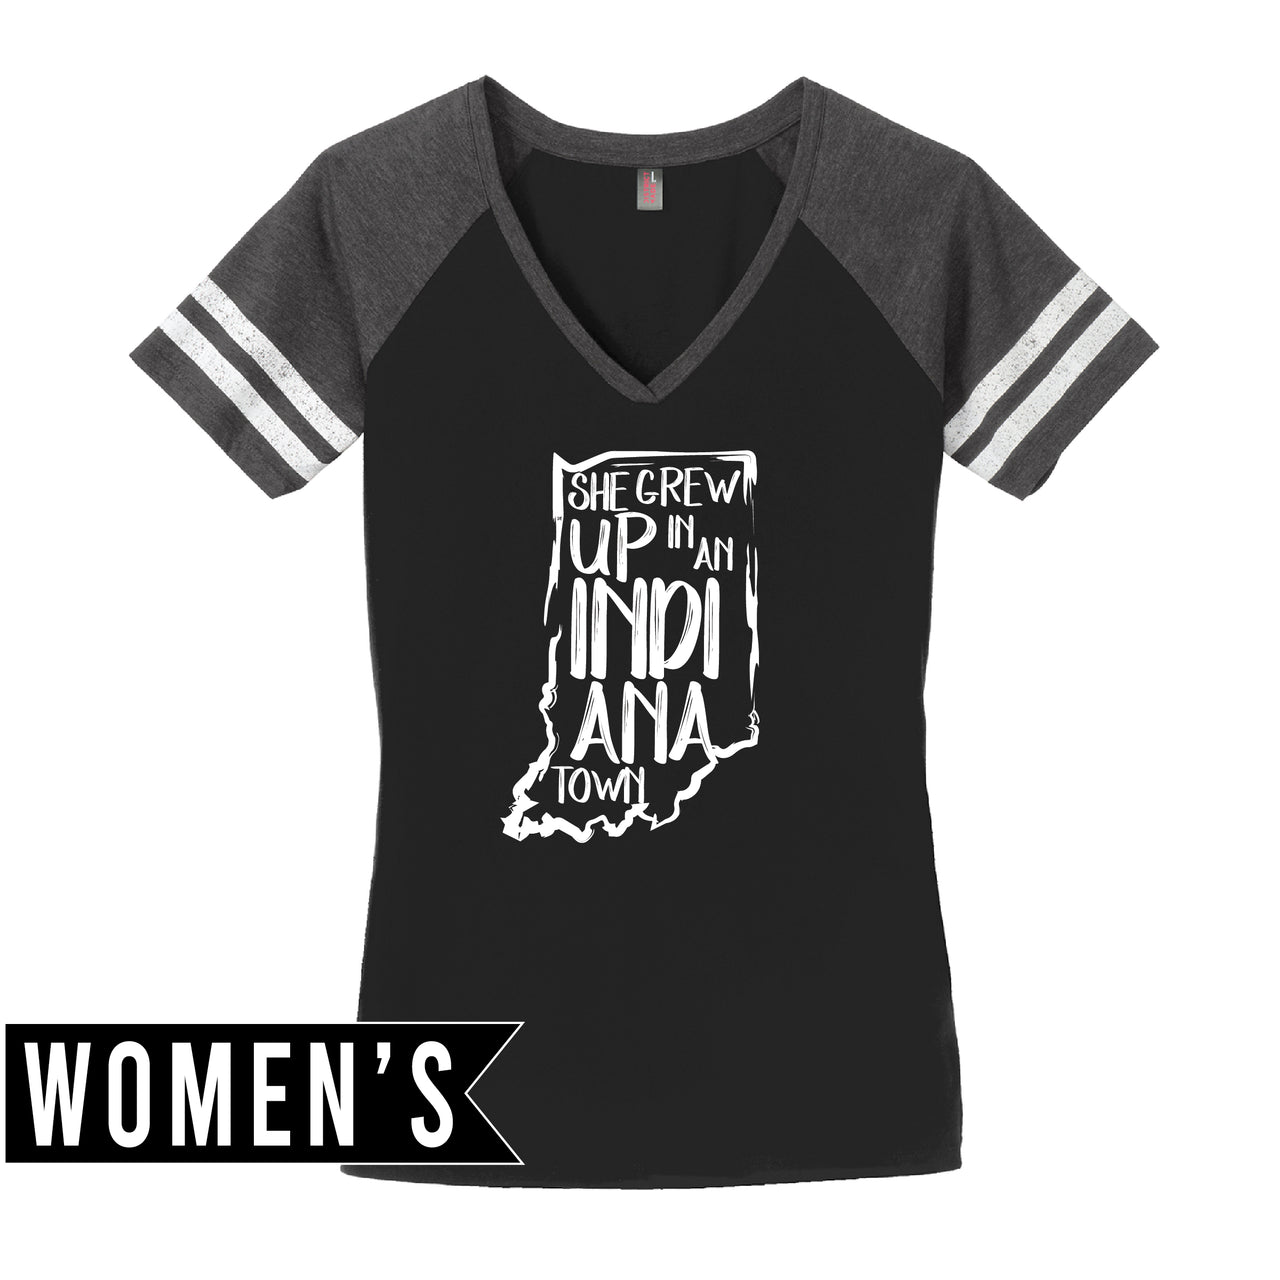 Women’s Game V-Neck Tee - Indiana Town